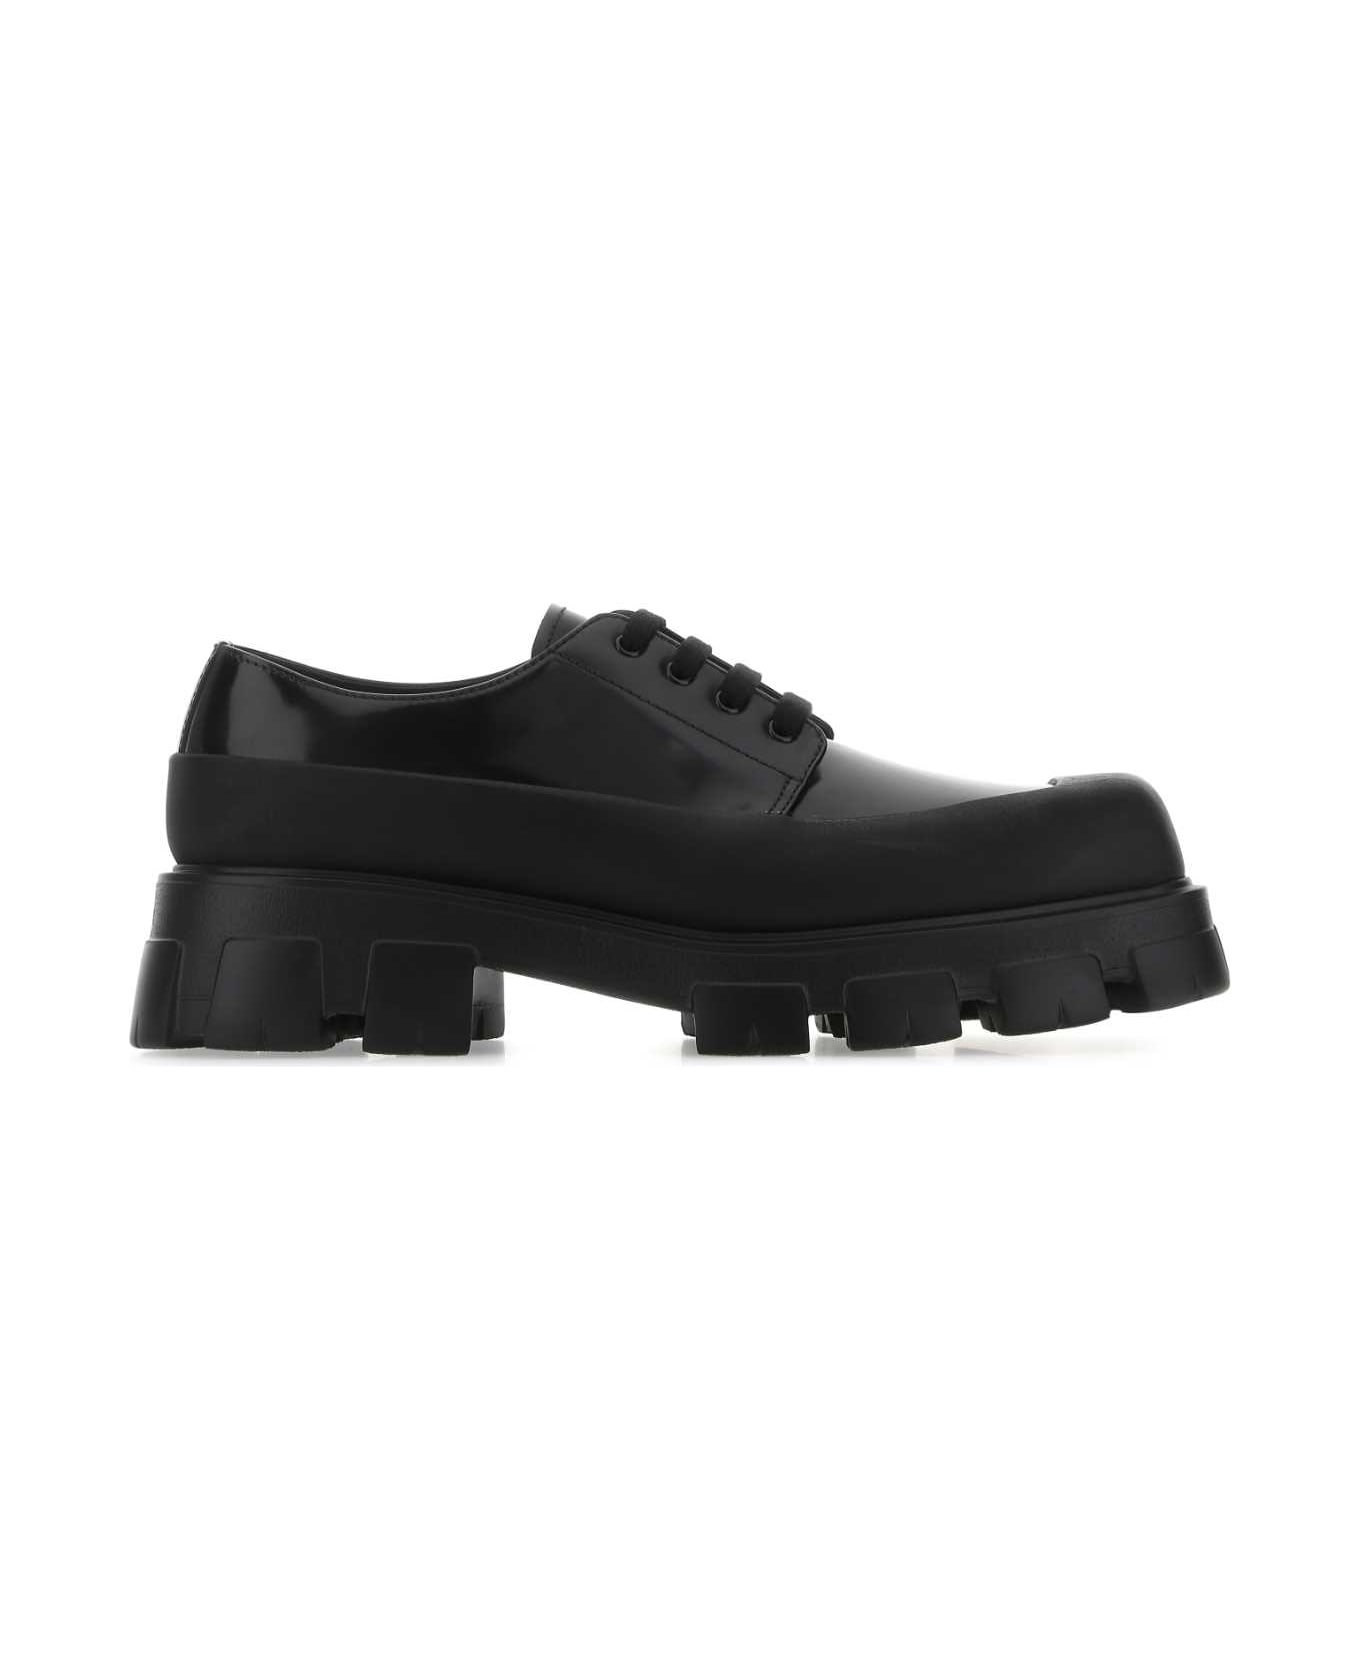 Prada Black Leather Lace-up Shoes - F0002